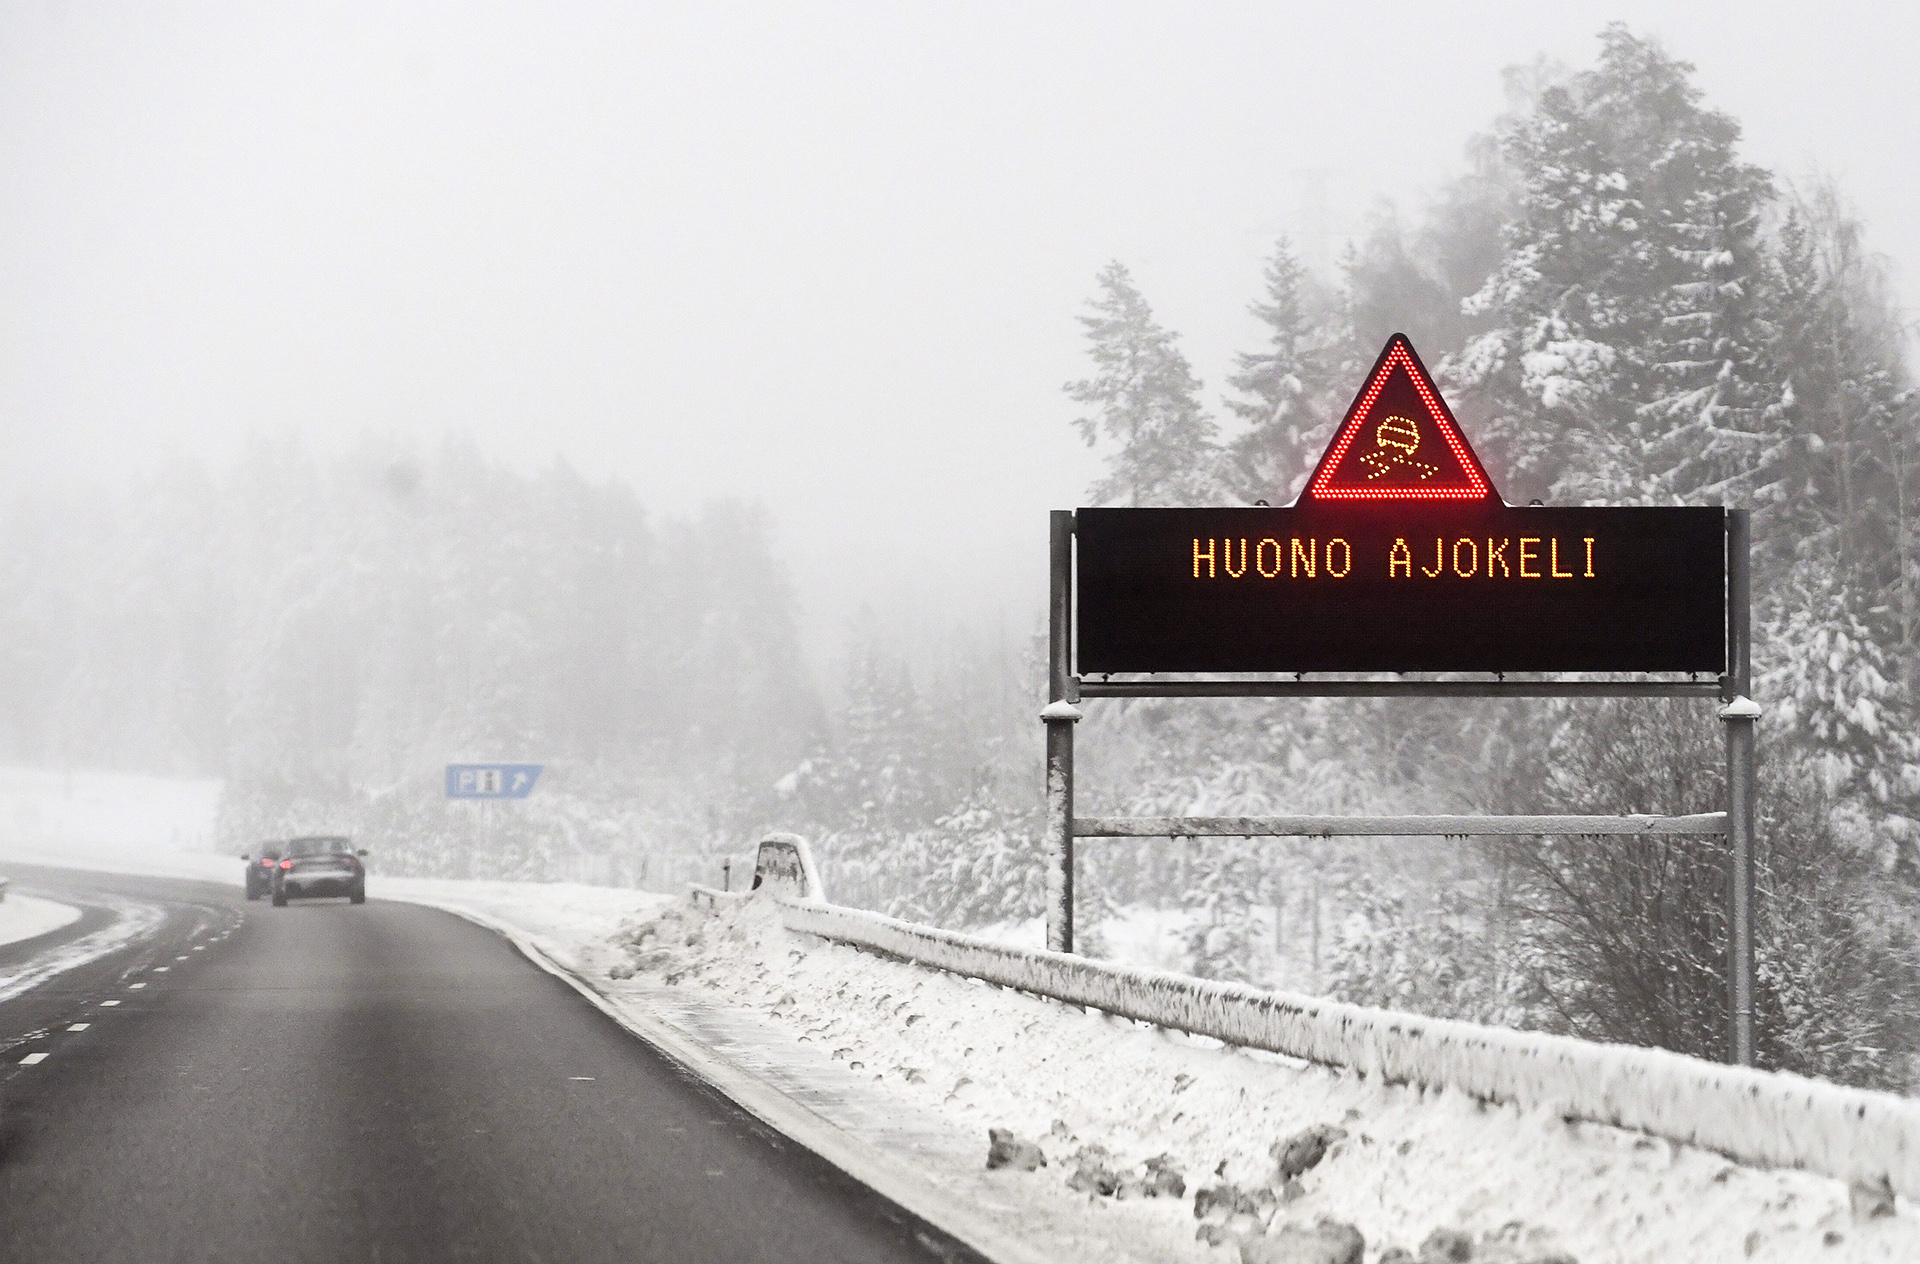 On Christmas Day, poor driving conditions in the western areas